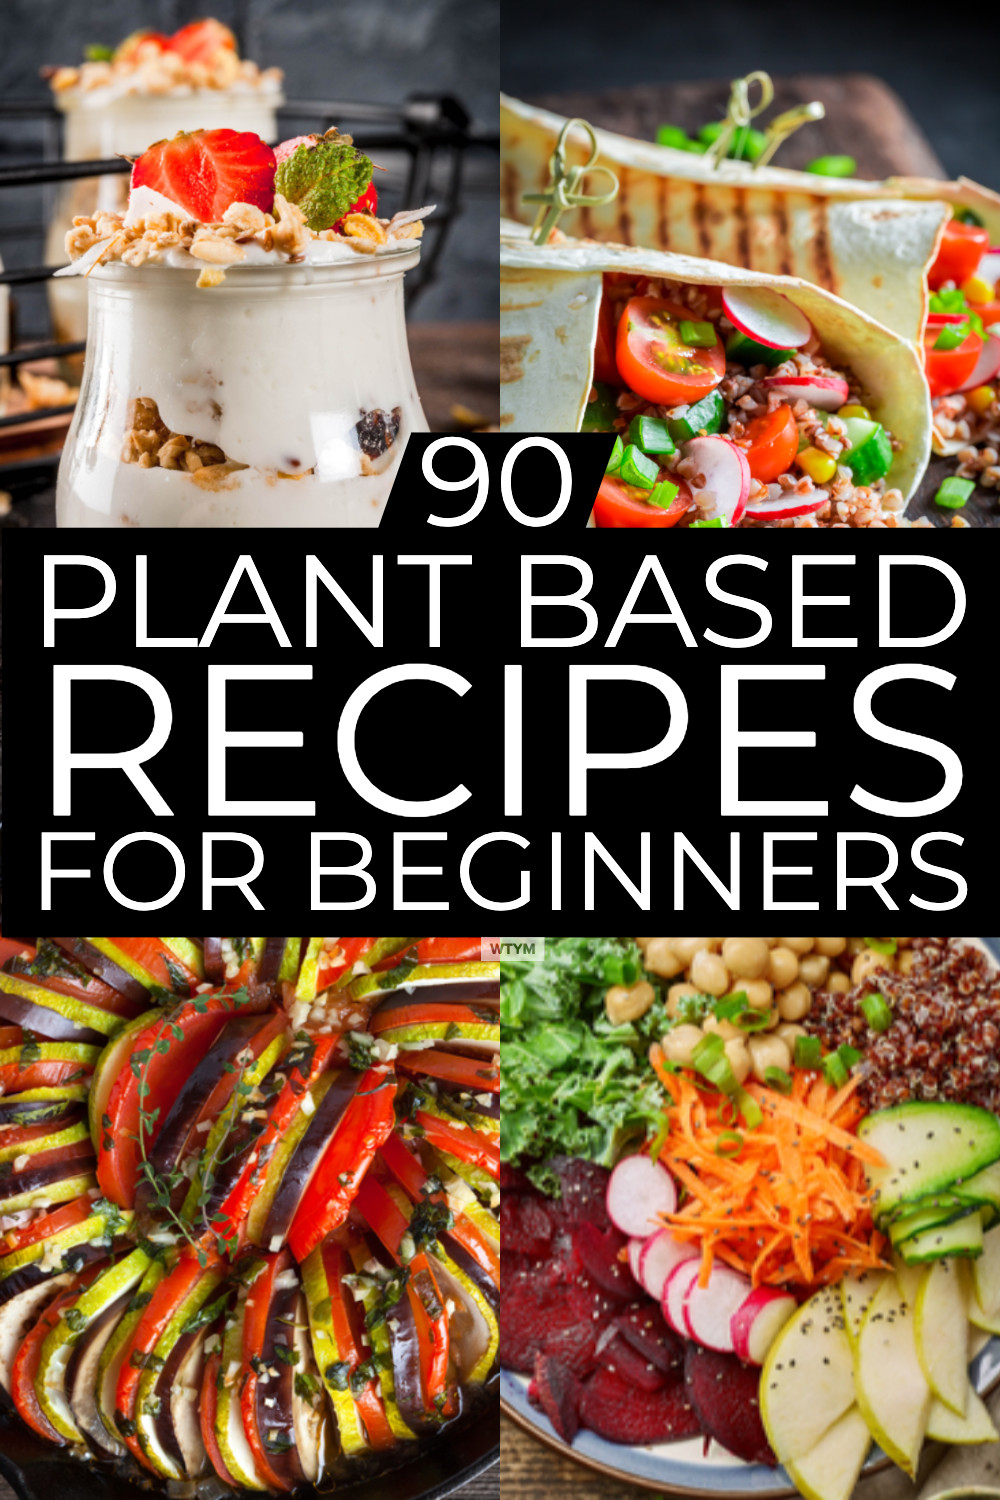 Low Fat Whole Food Plant Based Recipes
 Plant Based Diet Meal Plan For Beginners 90 Plant Based